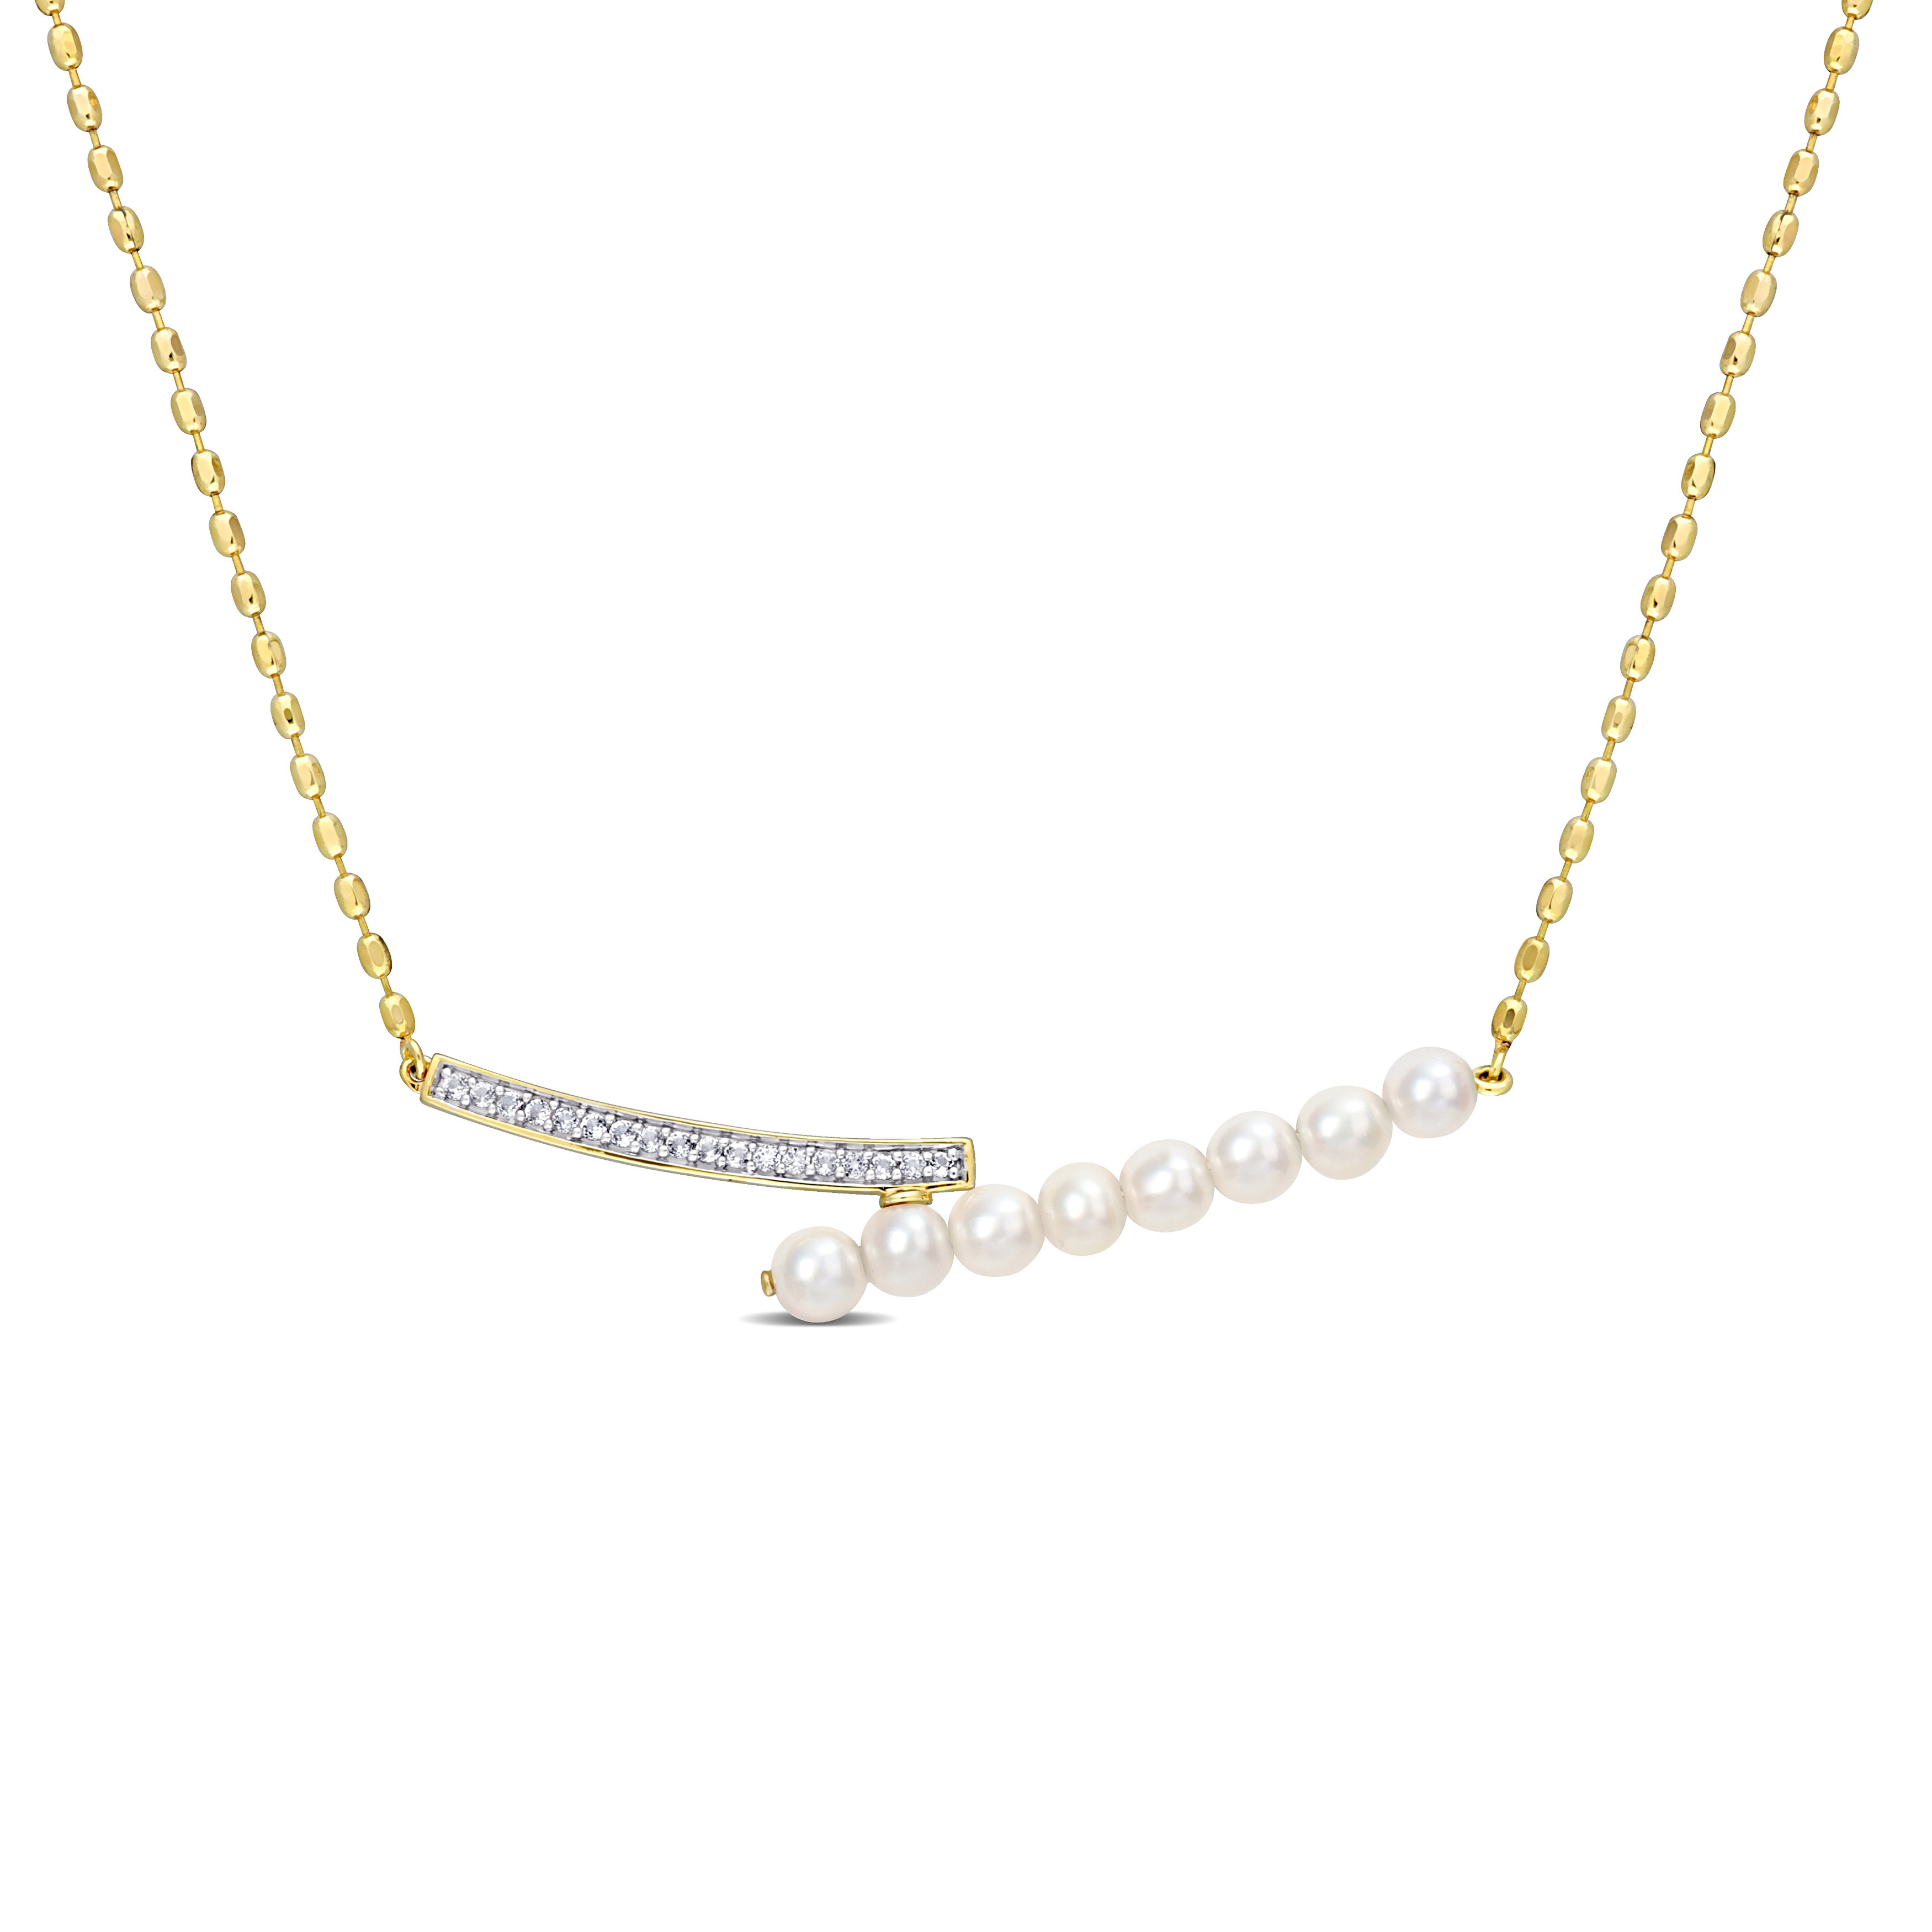 4-4.5 MM White Freshwatear Pearl and 1/5 CT TGW White Topaz Barc Necklace in Yellow Plated Sterling Silver - 18 in.